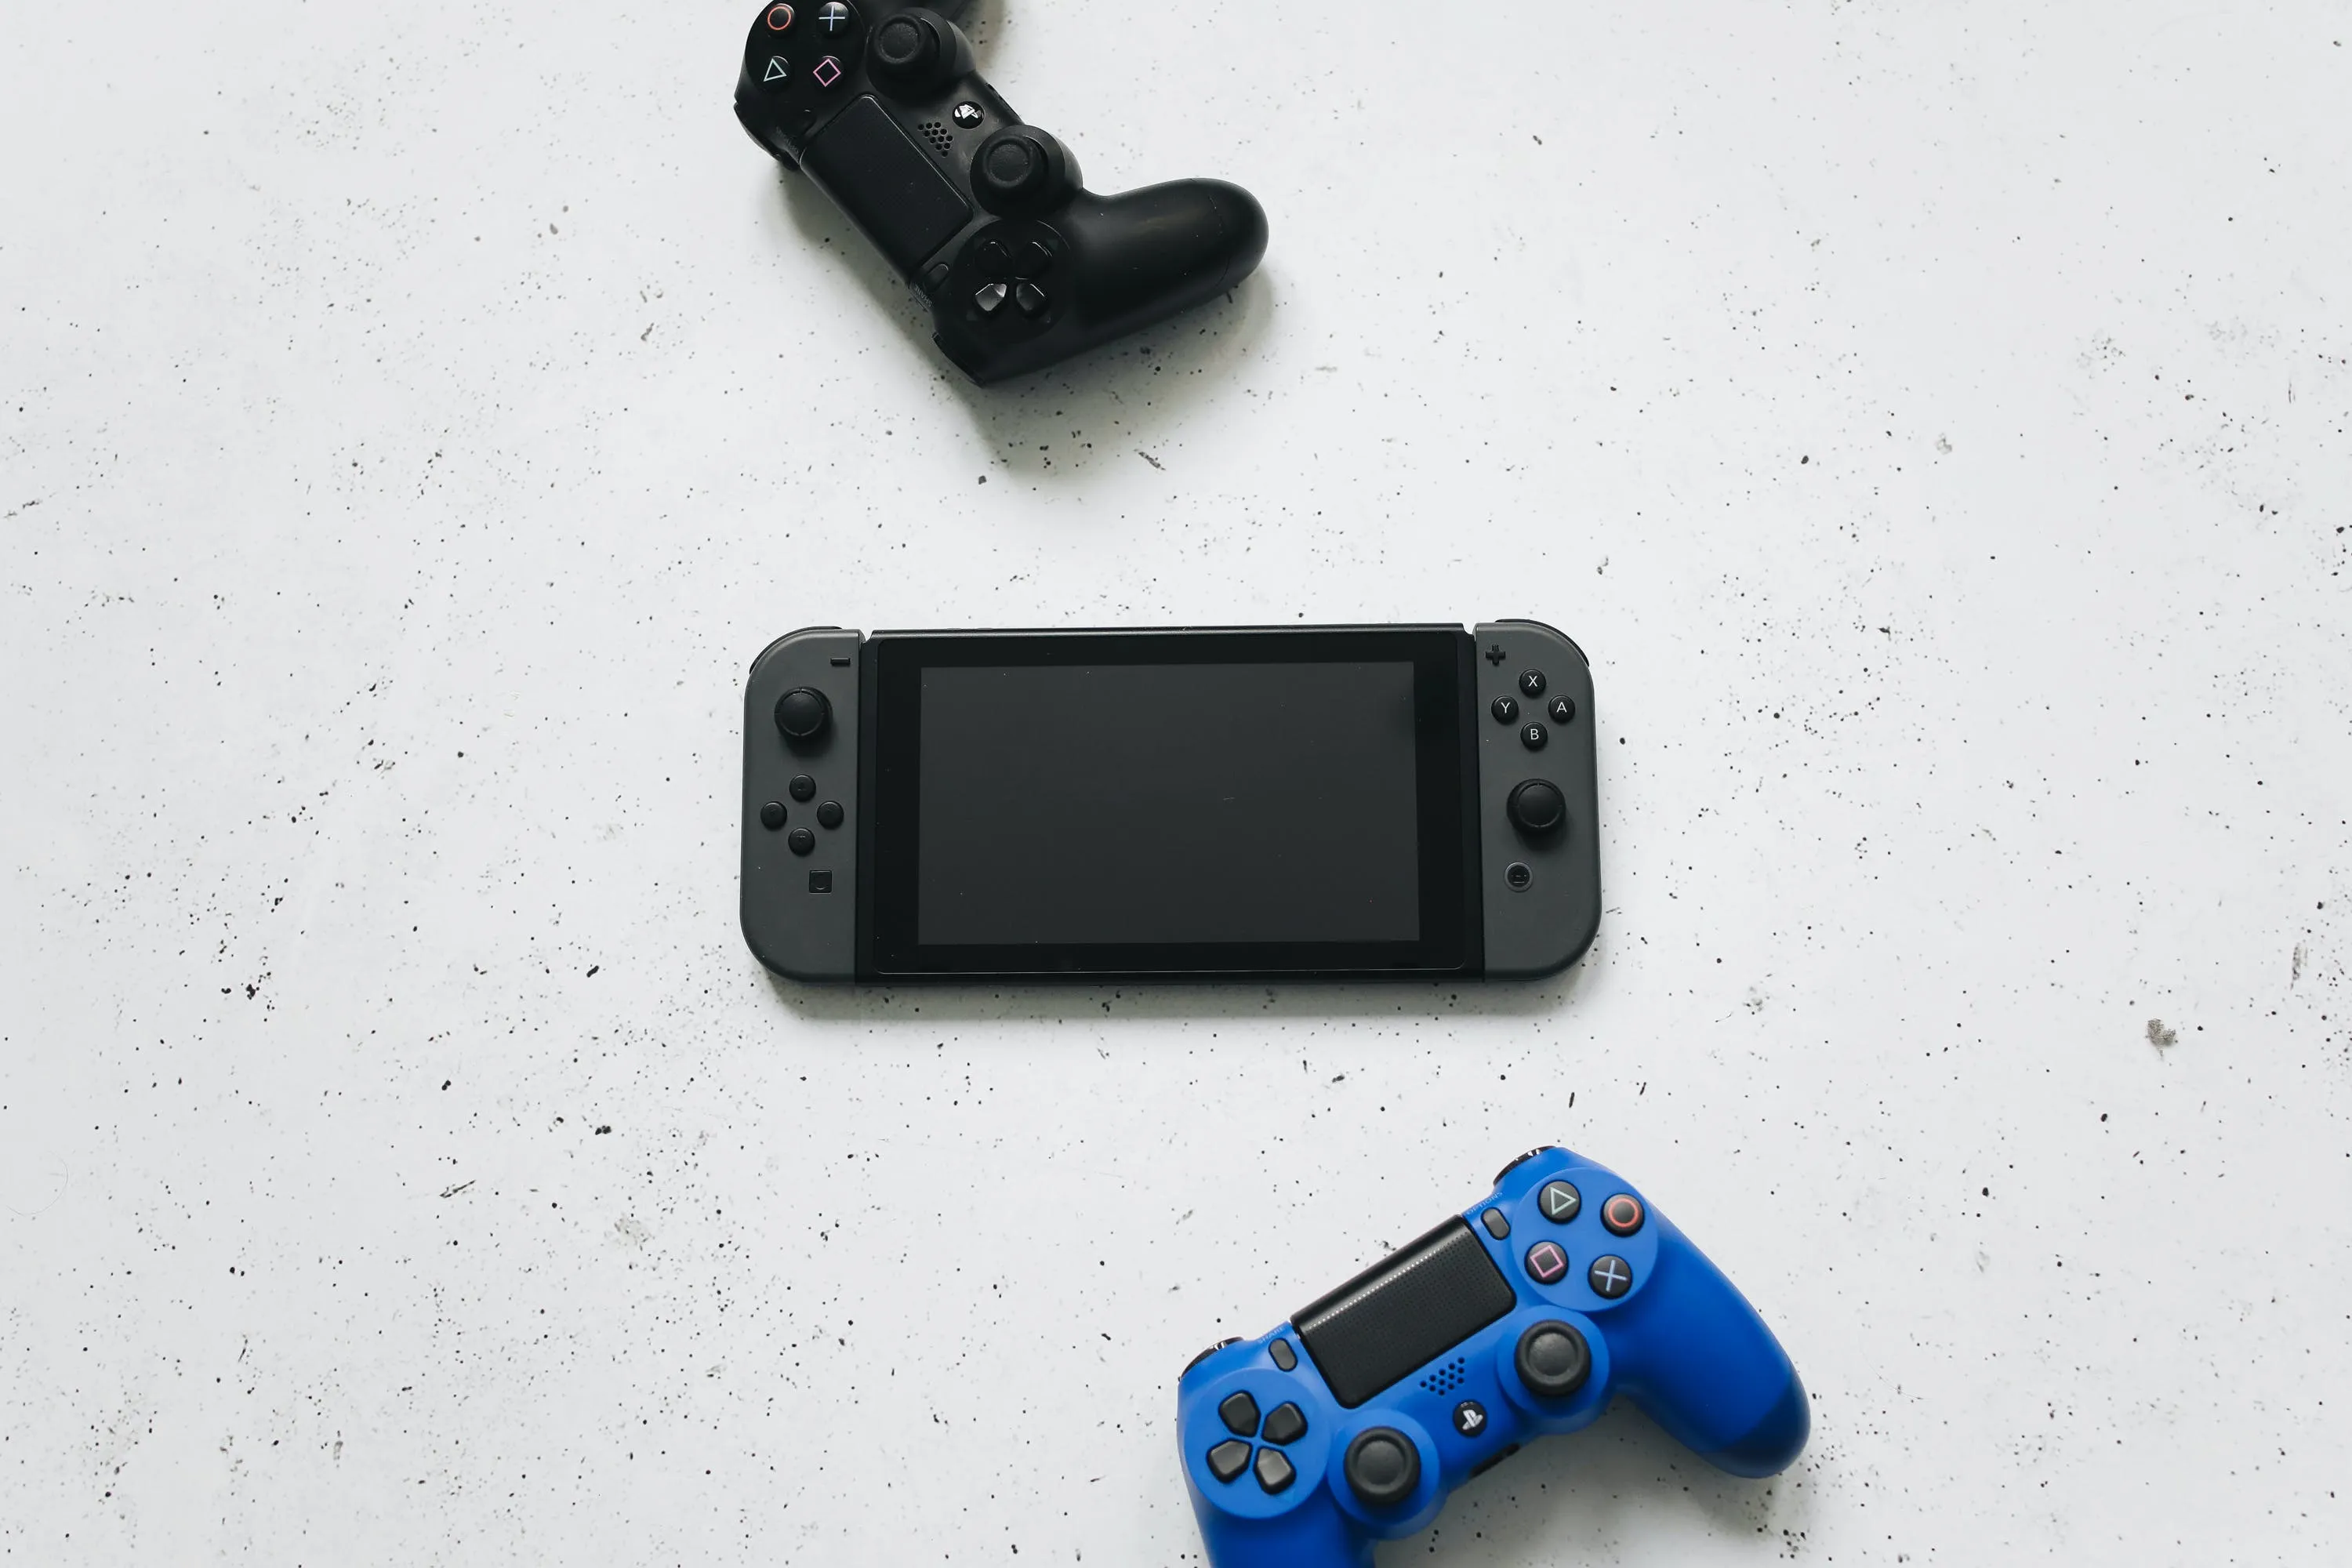 Definition of the gaming switch